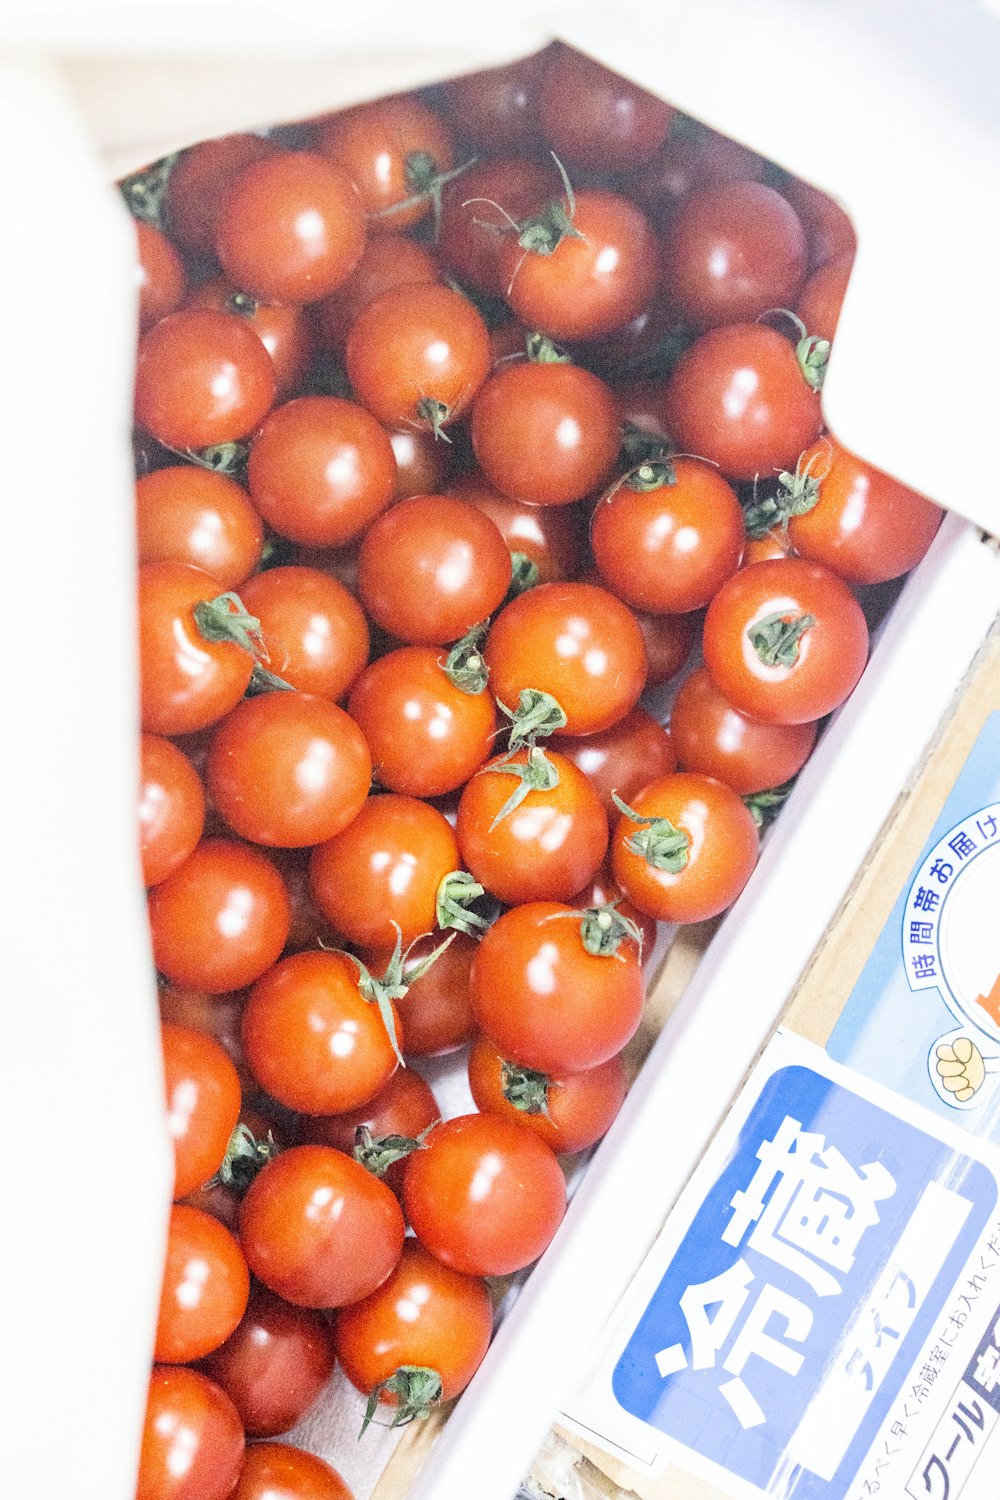 a bunch of tomatoes are in a box